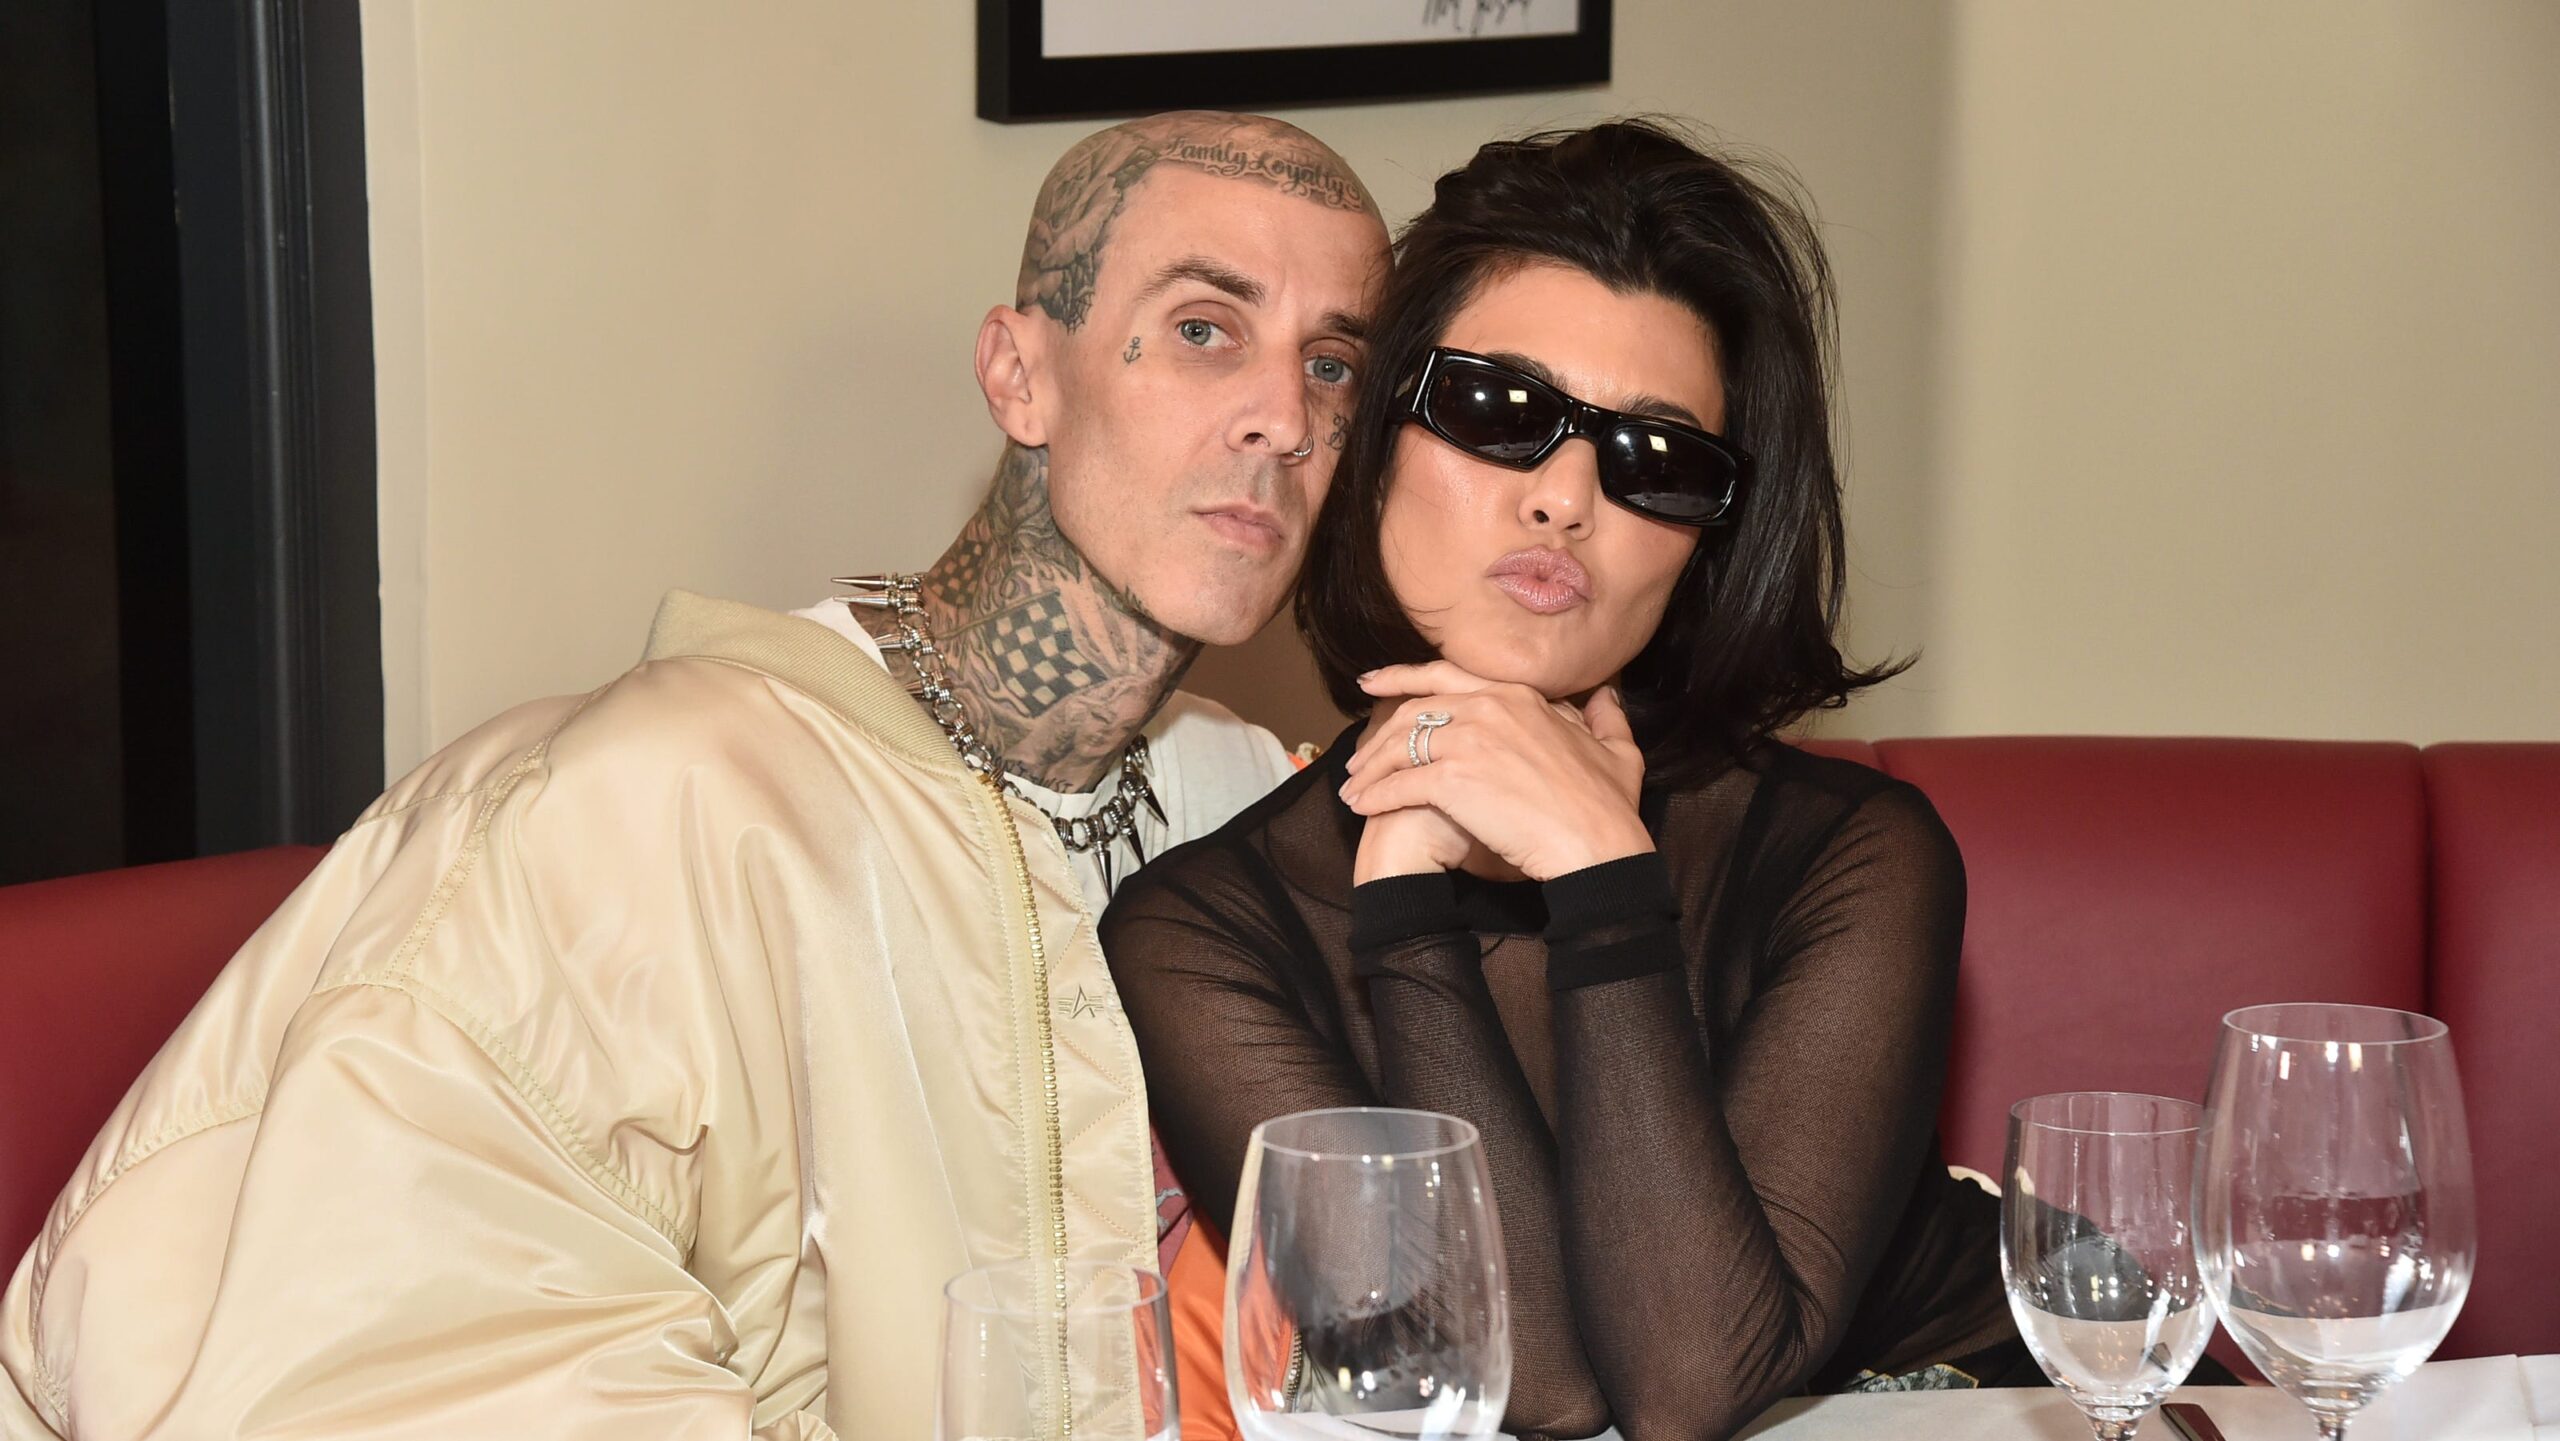 Kourtney Kardashian and Travis Barker: A Whirlwind Romance Leading to an Unexpected Surprise! 24